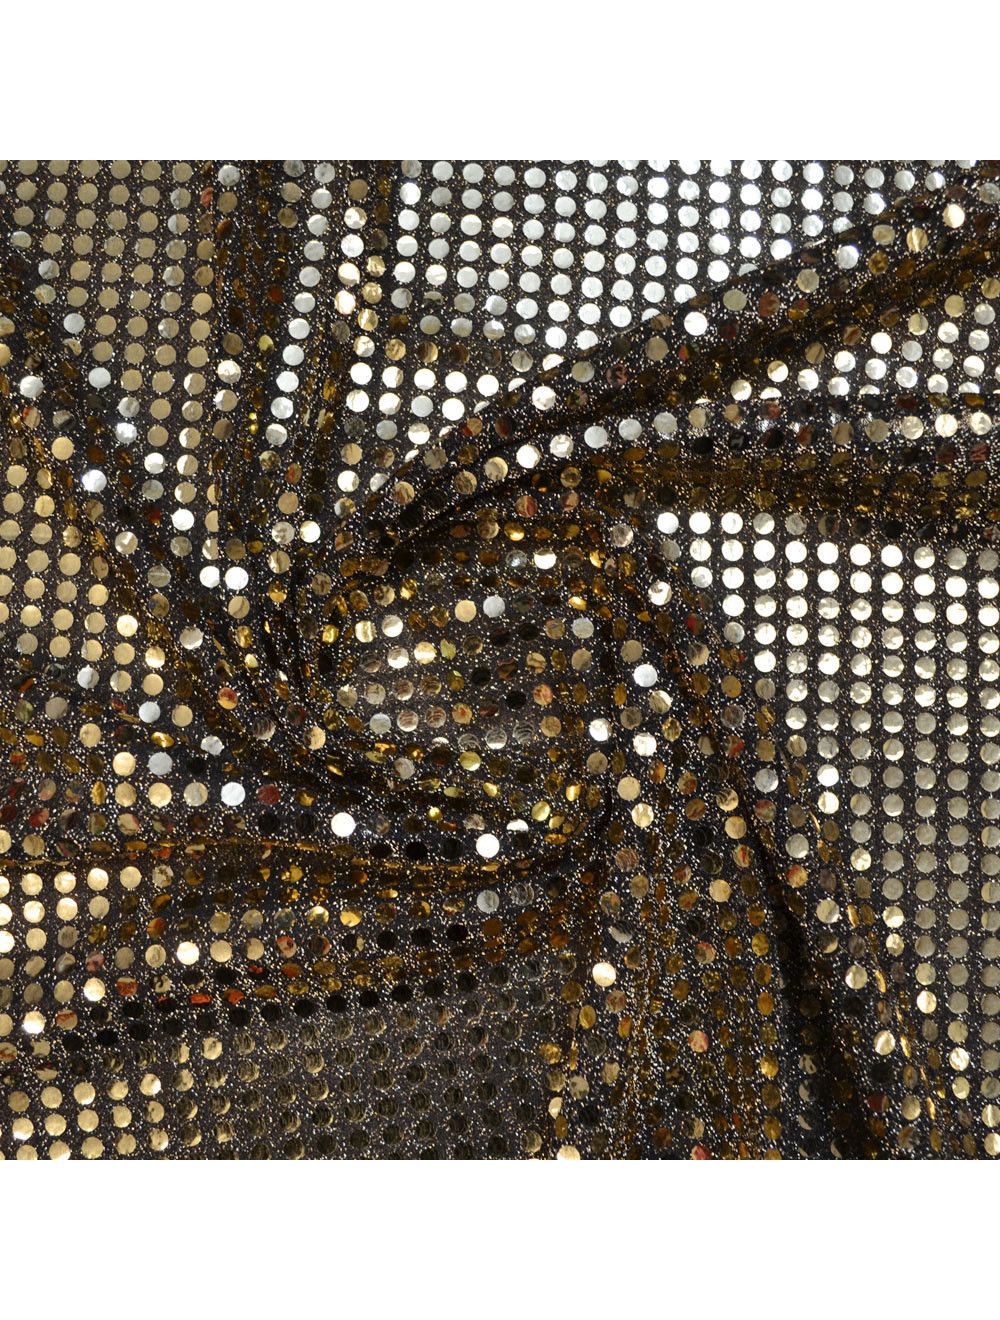 Black/Gold Sequin Jersey Fabric ...